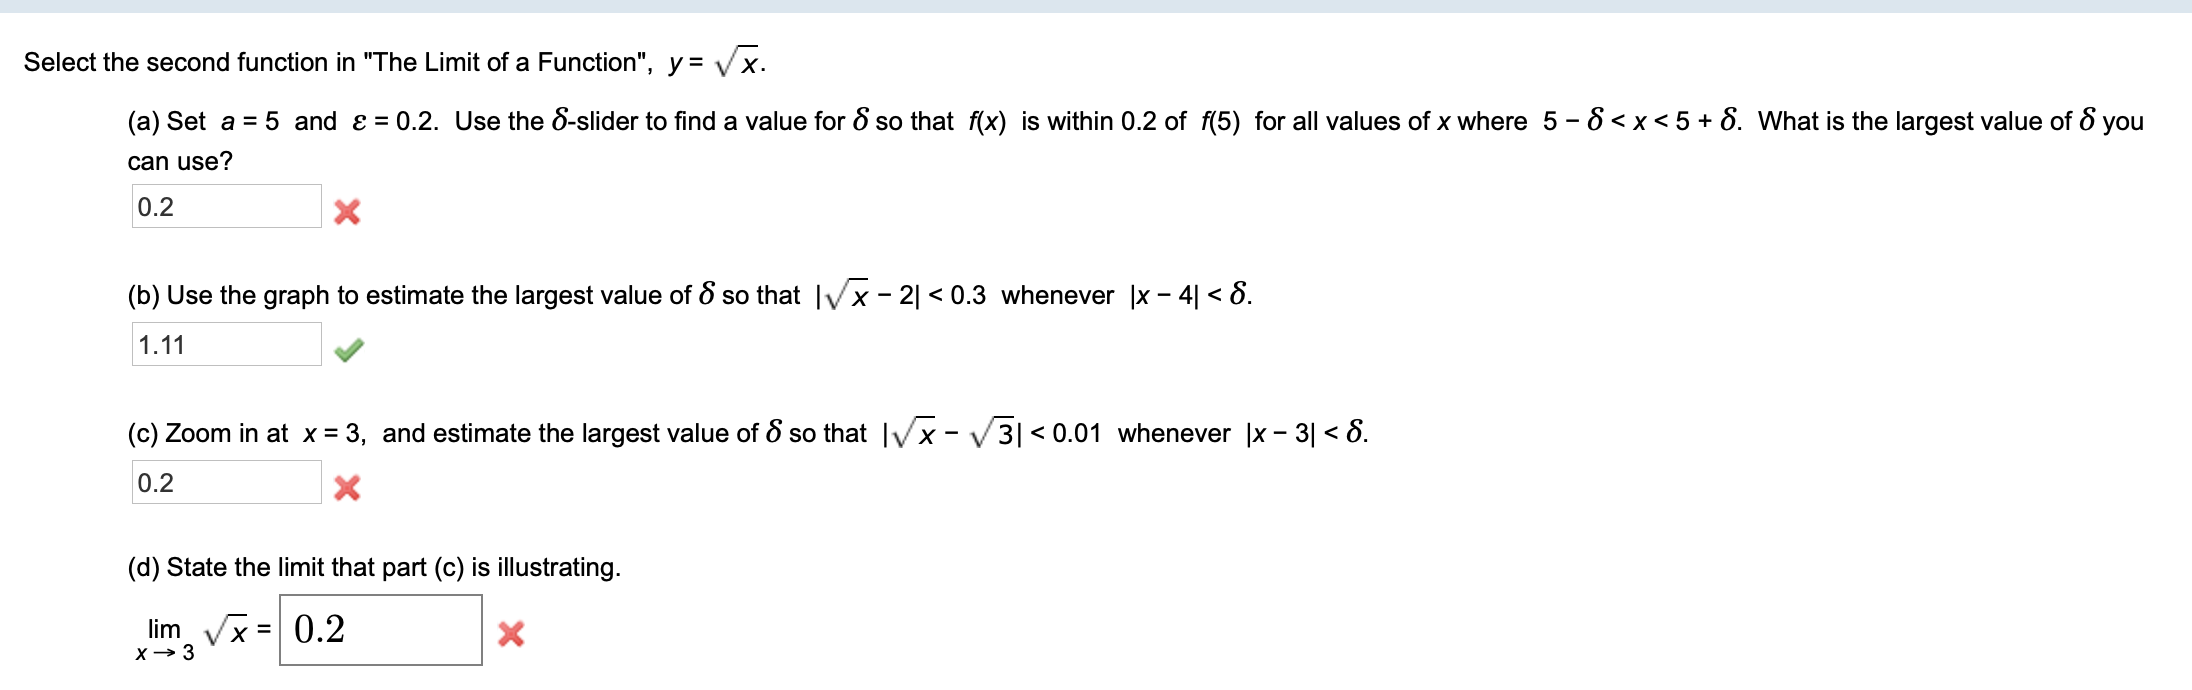 Select the second function in "The Limit of a Function", y = Vx
0.2. Use the 8-slider to find a value for 8 so that f(x) is within 0.2 of f(5) for all values of x where 5 - 8 <x<5+ 8. What is the largest value of 8 you
(a) Set a
5 and e
can use?
0.2
X
(b) Use the graph to estimate the largest value of S so that Ix- 21 < 0.3 whenever |x - 4 < 8
1.11
(c) Zoom in at x = 3, and estimate the largest value of 8 so that x -3| < 0.01 whenever x - 3 <8.
0.2
(d) State the limit that part (c) is illustrating
limVx0.2
=
x3
